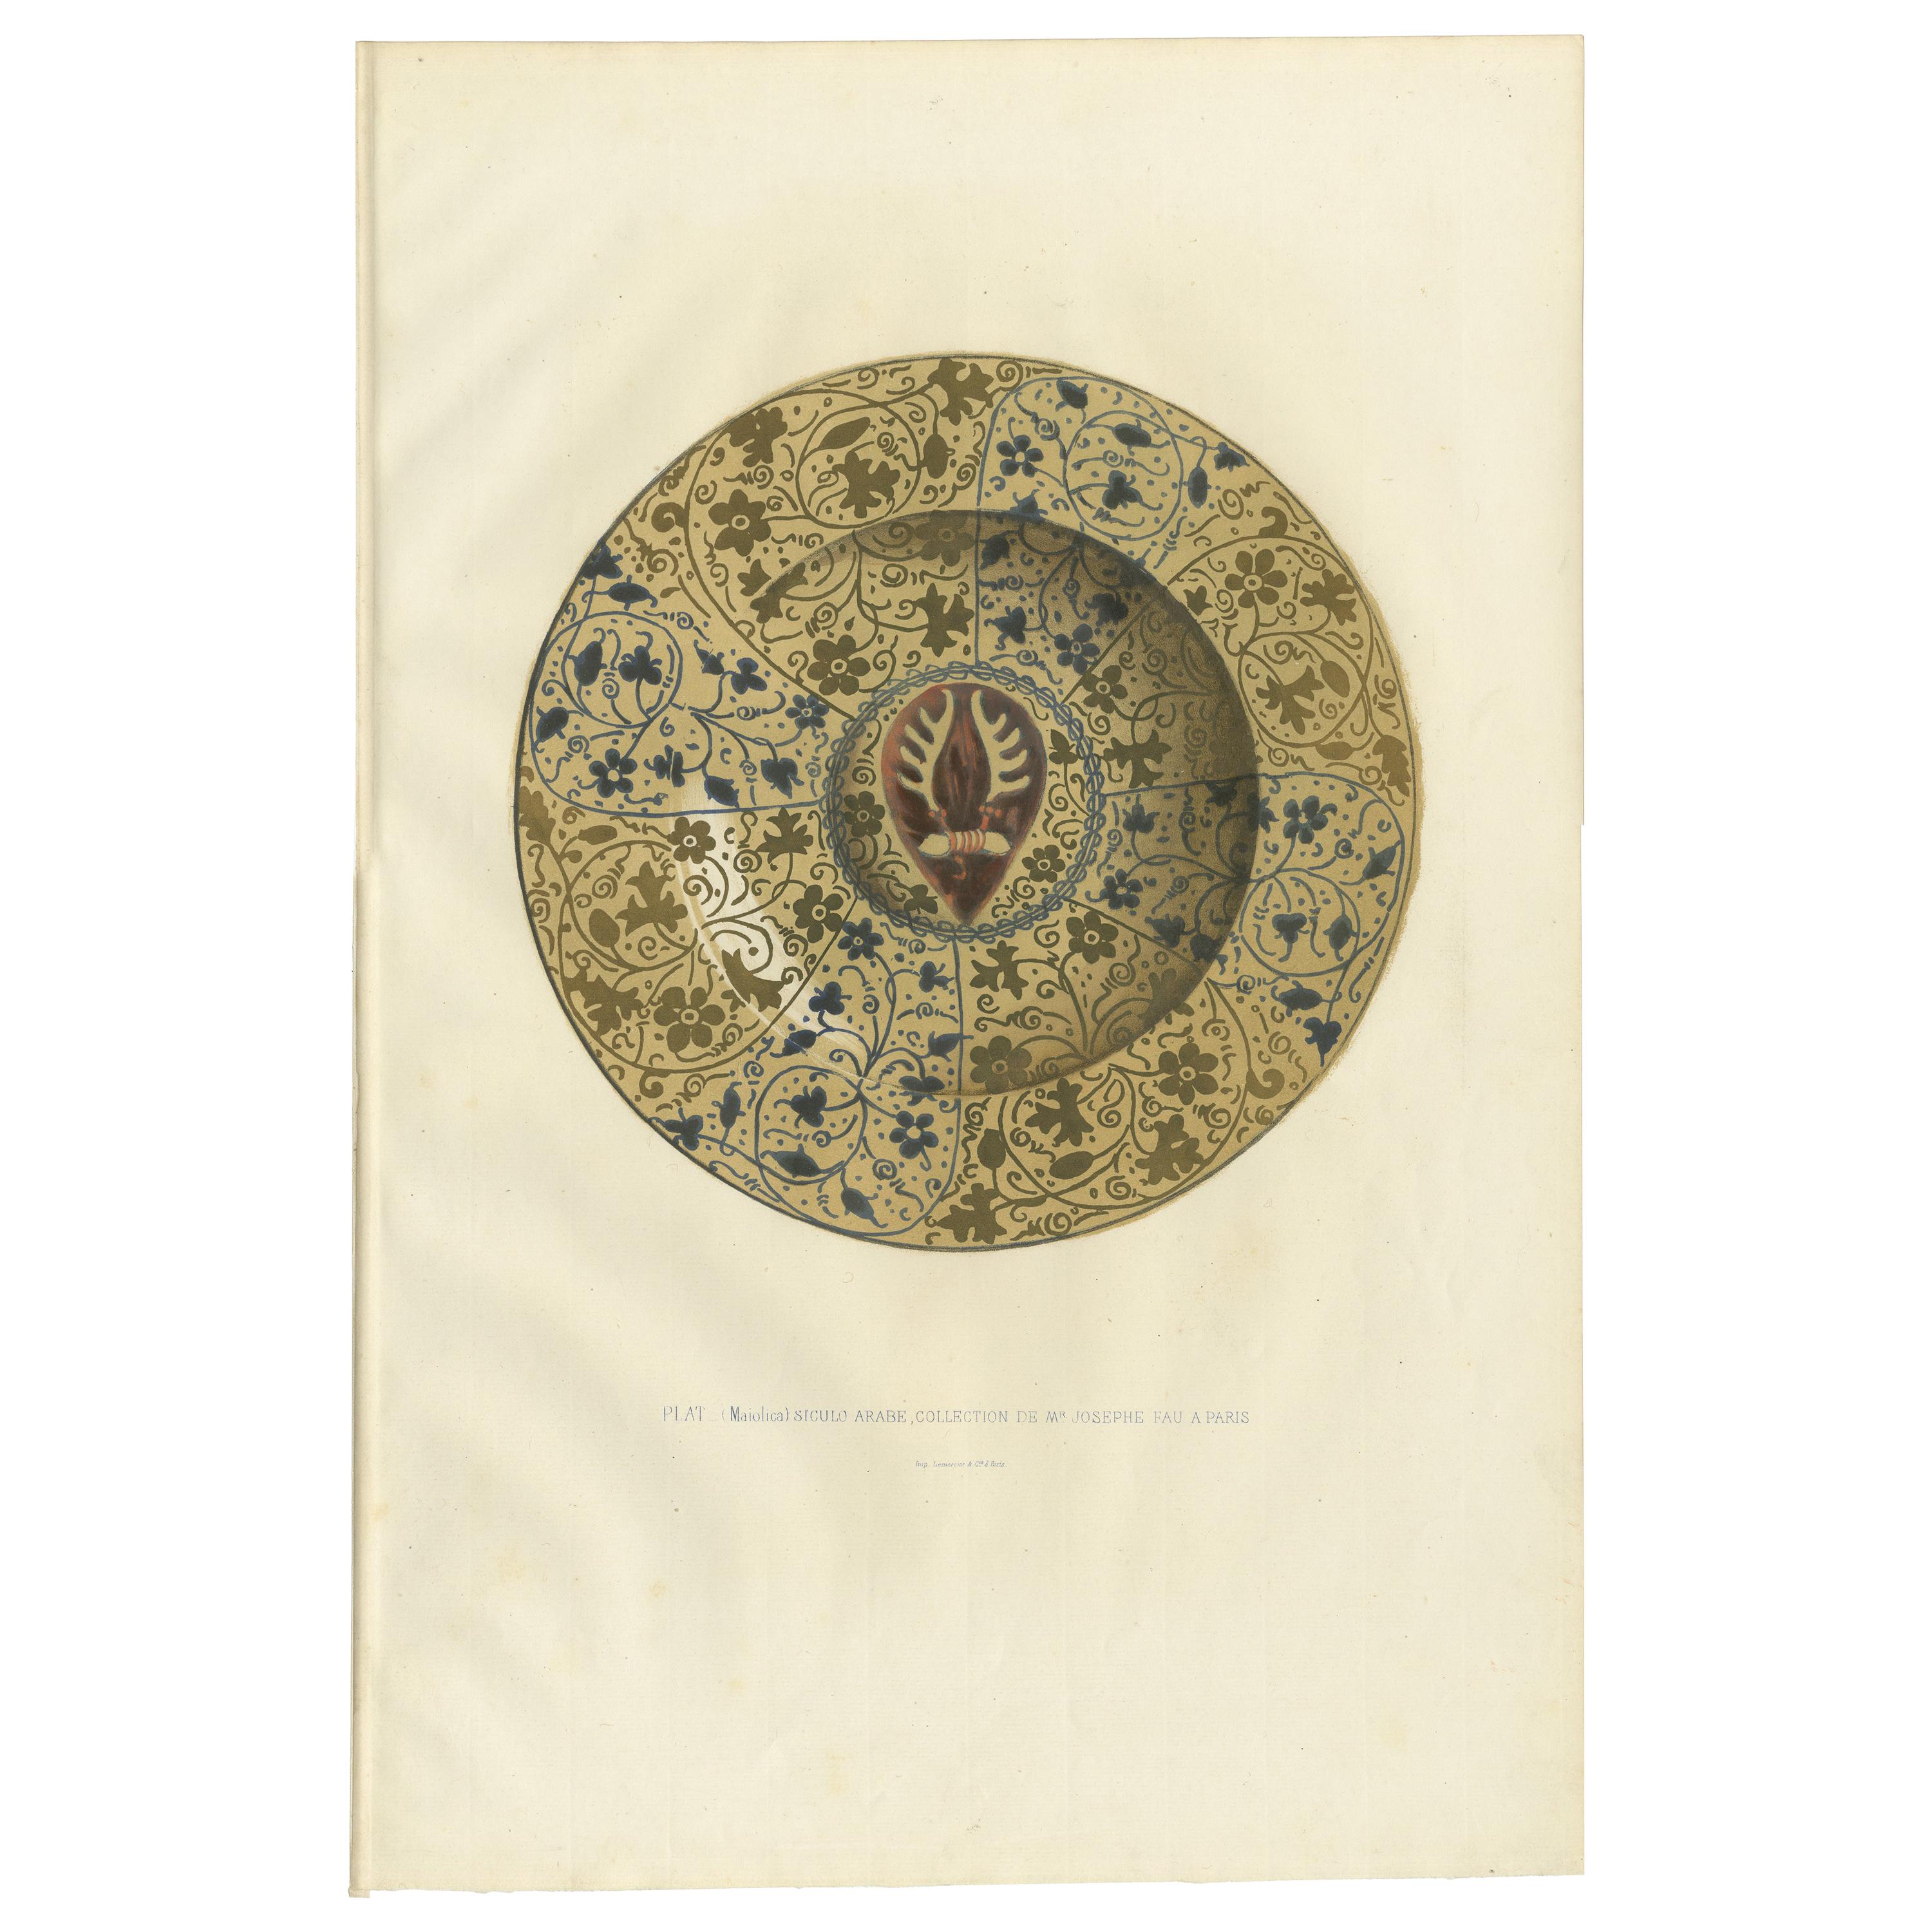 Antique Print of a Siculo-Arabic Majolica Plate by Delange '1869' For Sale